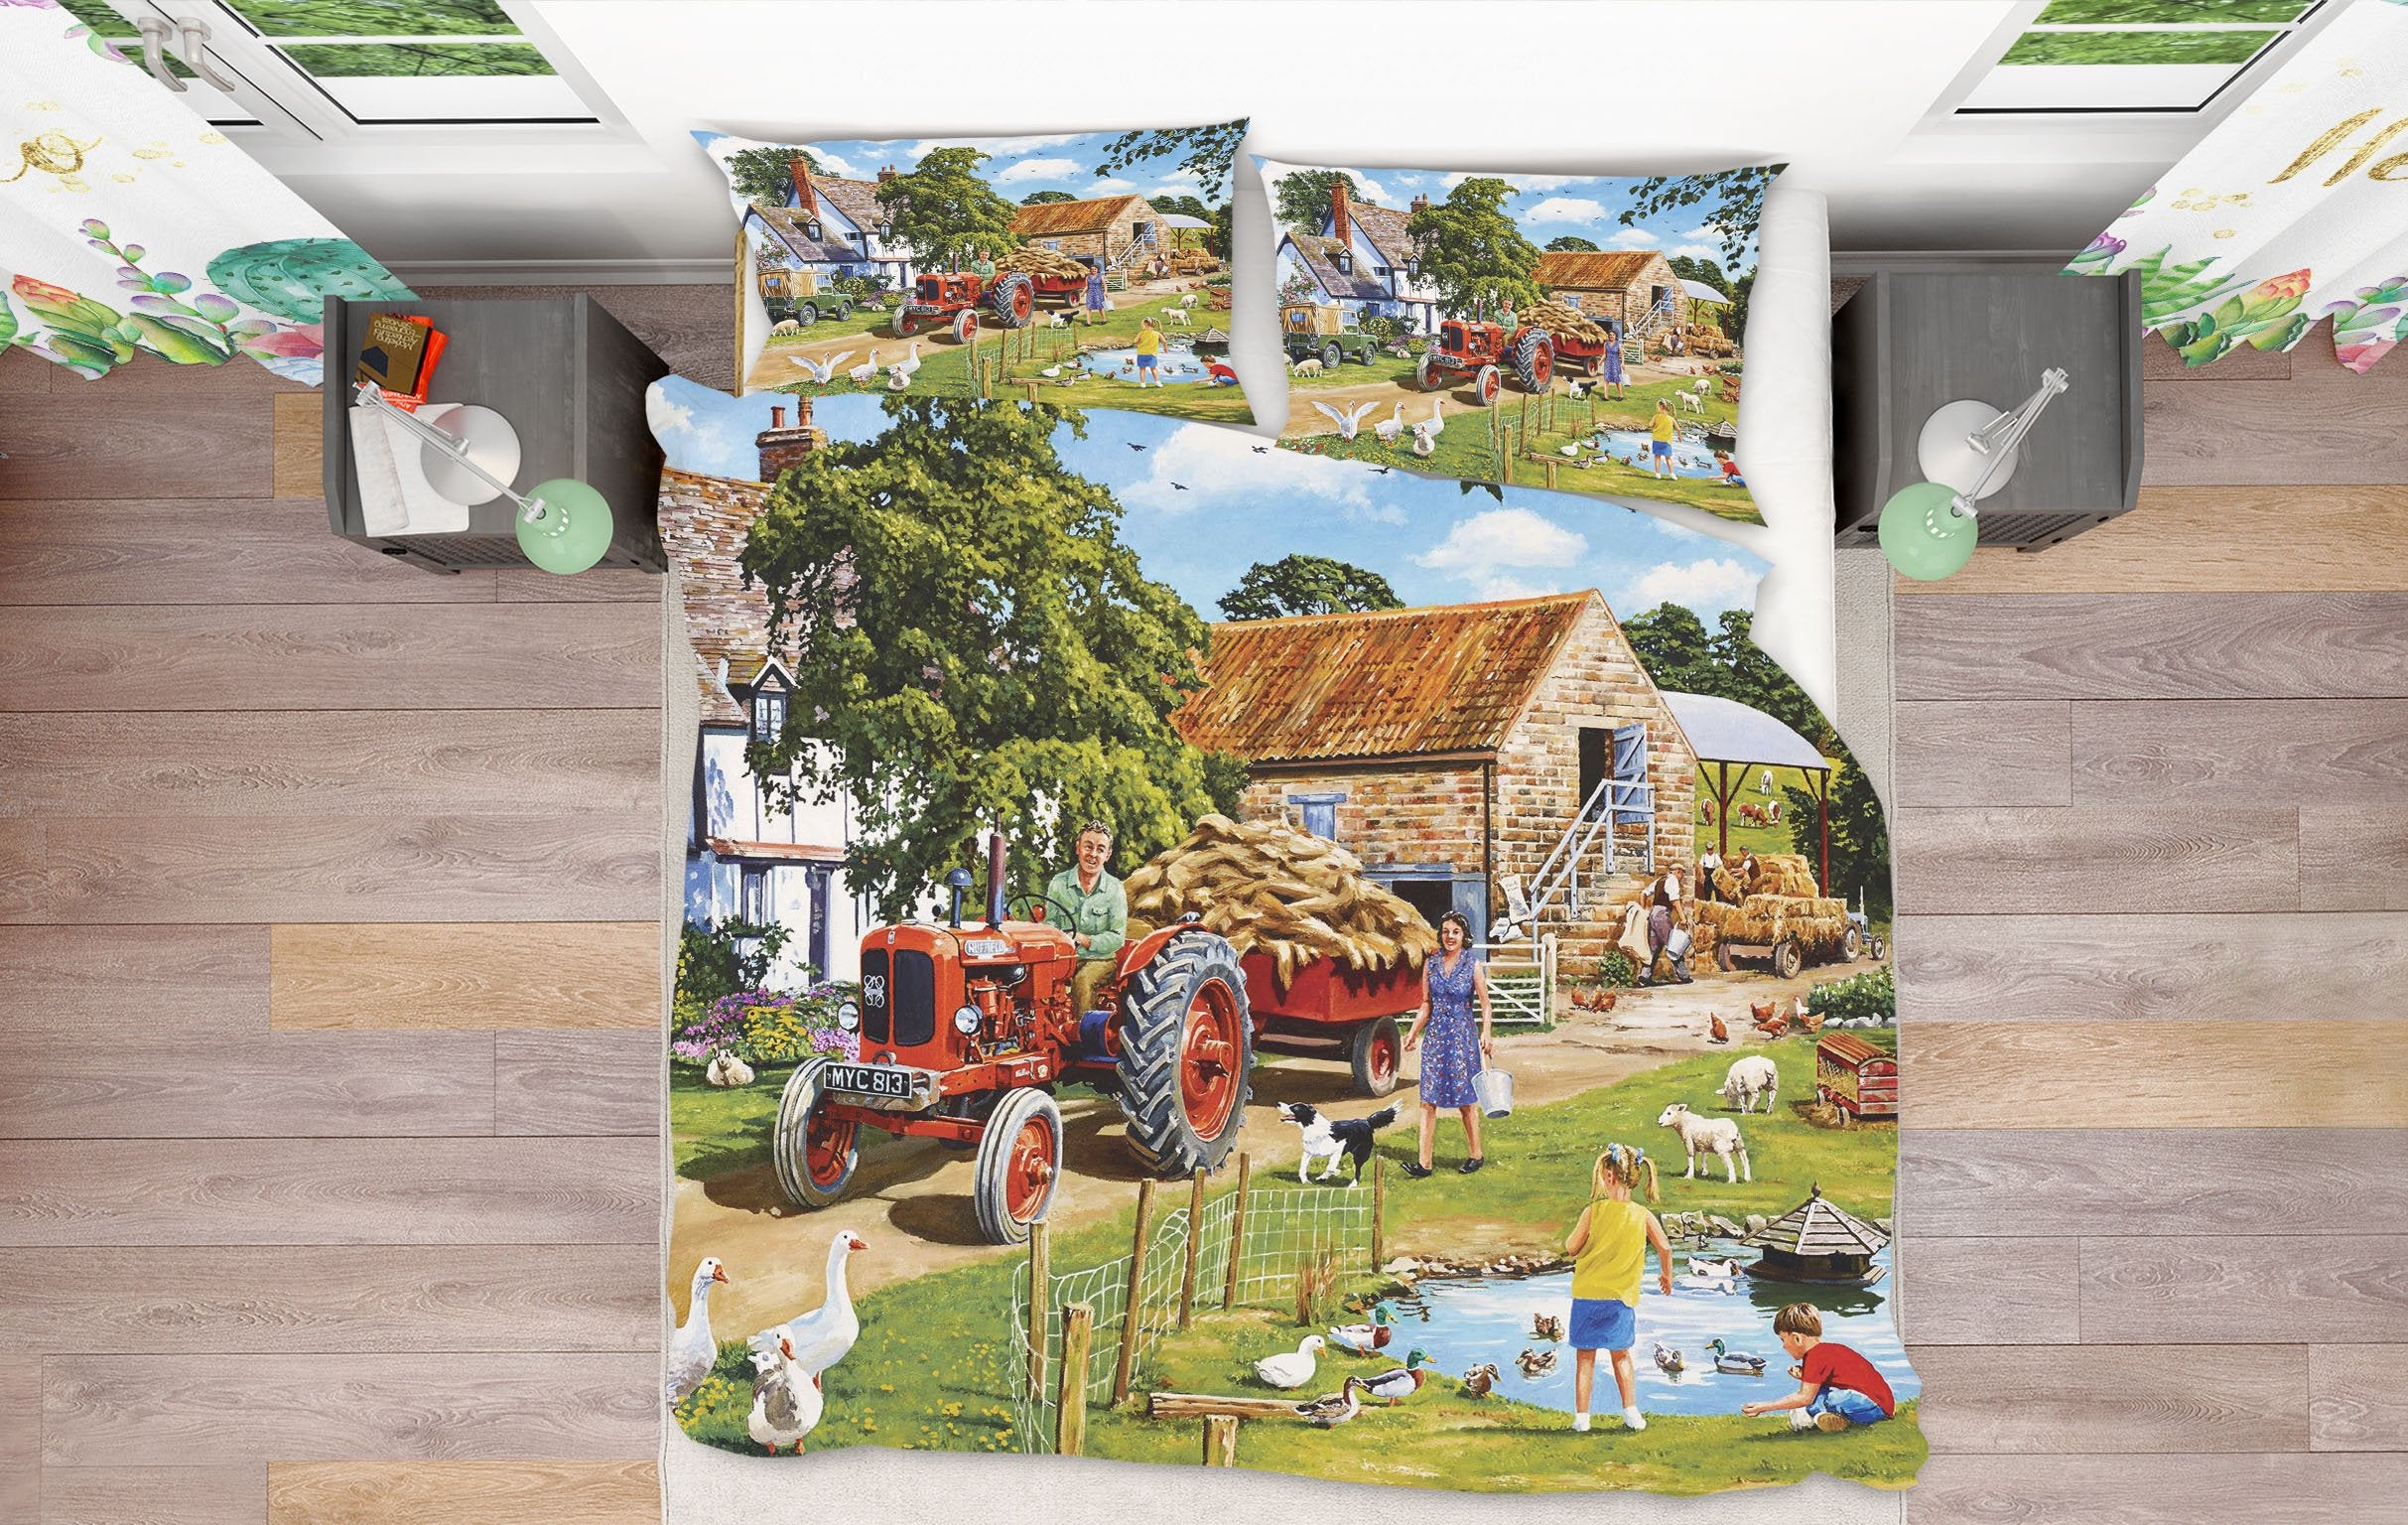 3D A Family Farm 2018 Trevor Mitchell bedding Bed Pillowcases Quilt Quiet Covers AJ Creativity Home 